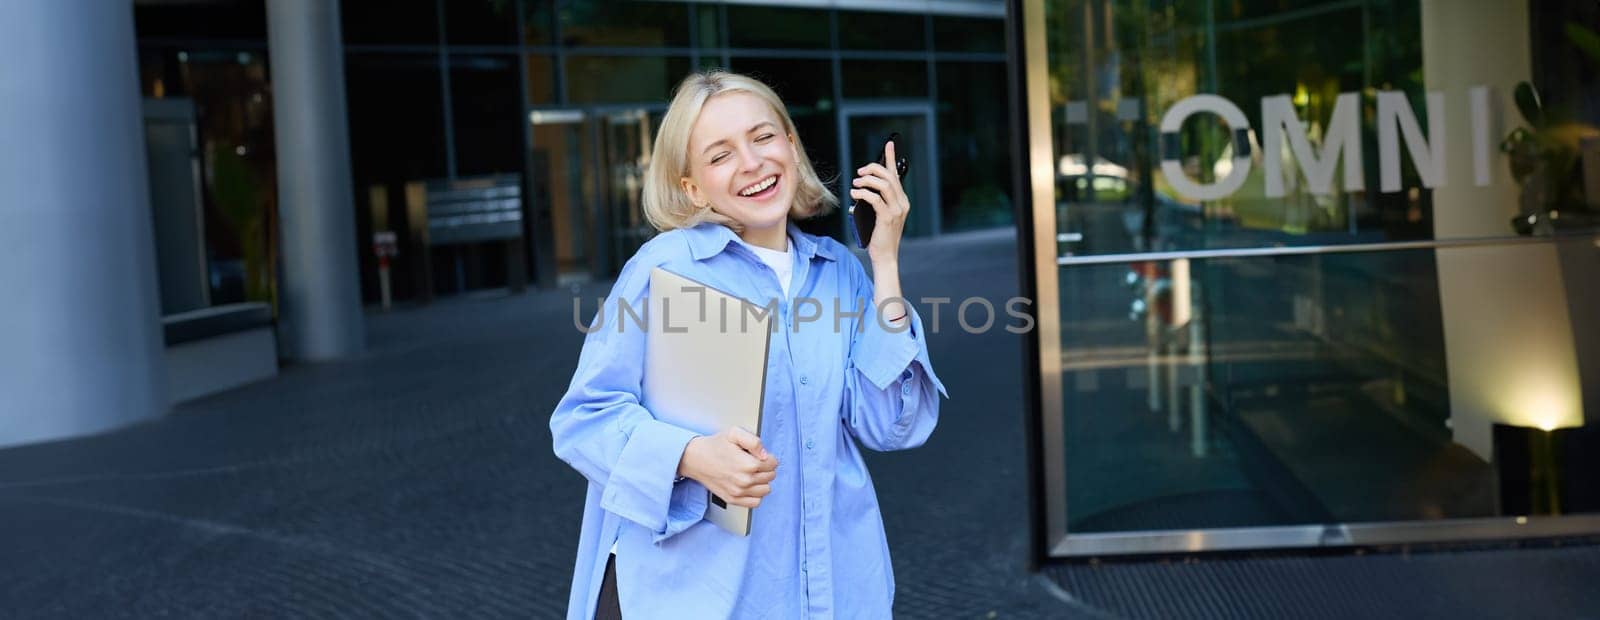 Carefree blond woman with laptop and smartphone, singing, listening music on mobile phone app, posing near office building or college campus on street.